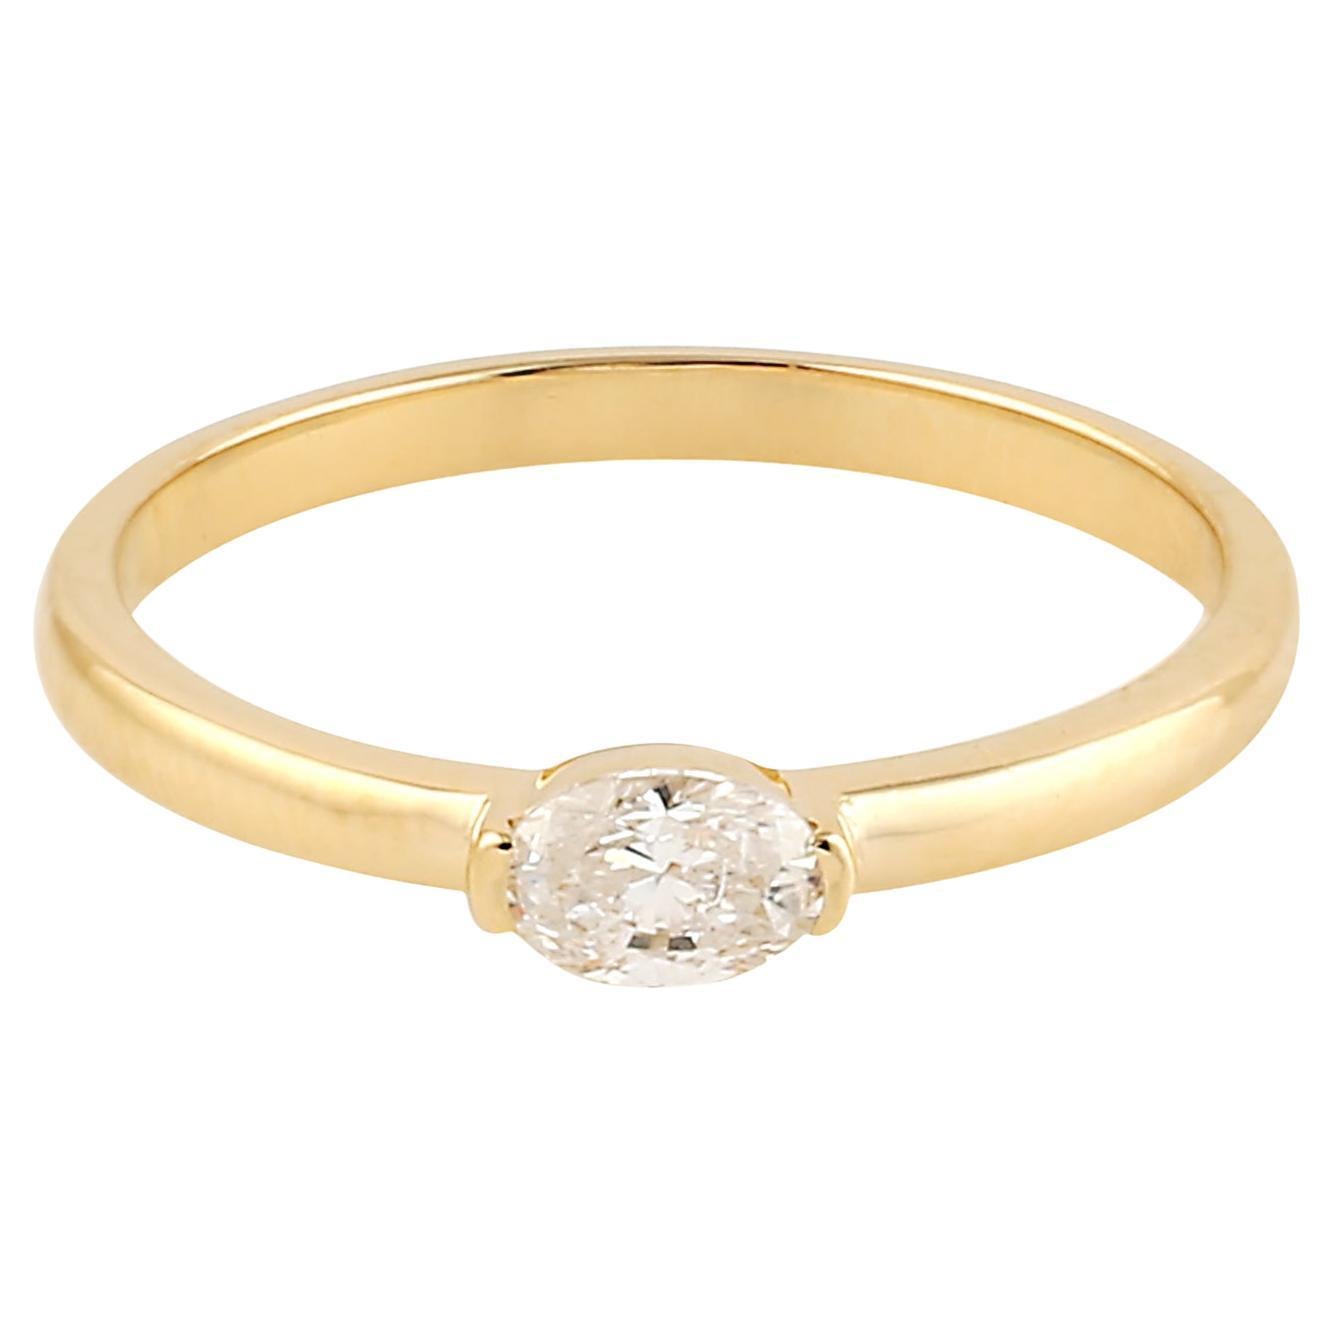 Oval Shaped Rosecut Diamonds Band Ring Made In 18k Yellow Gold For Sale